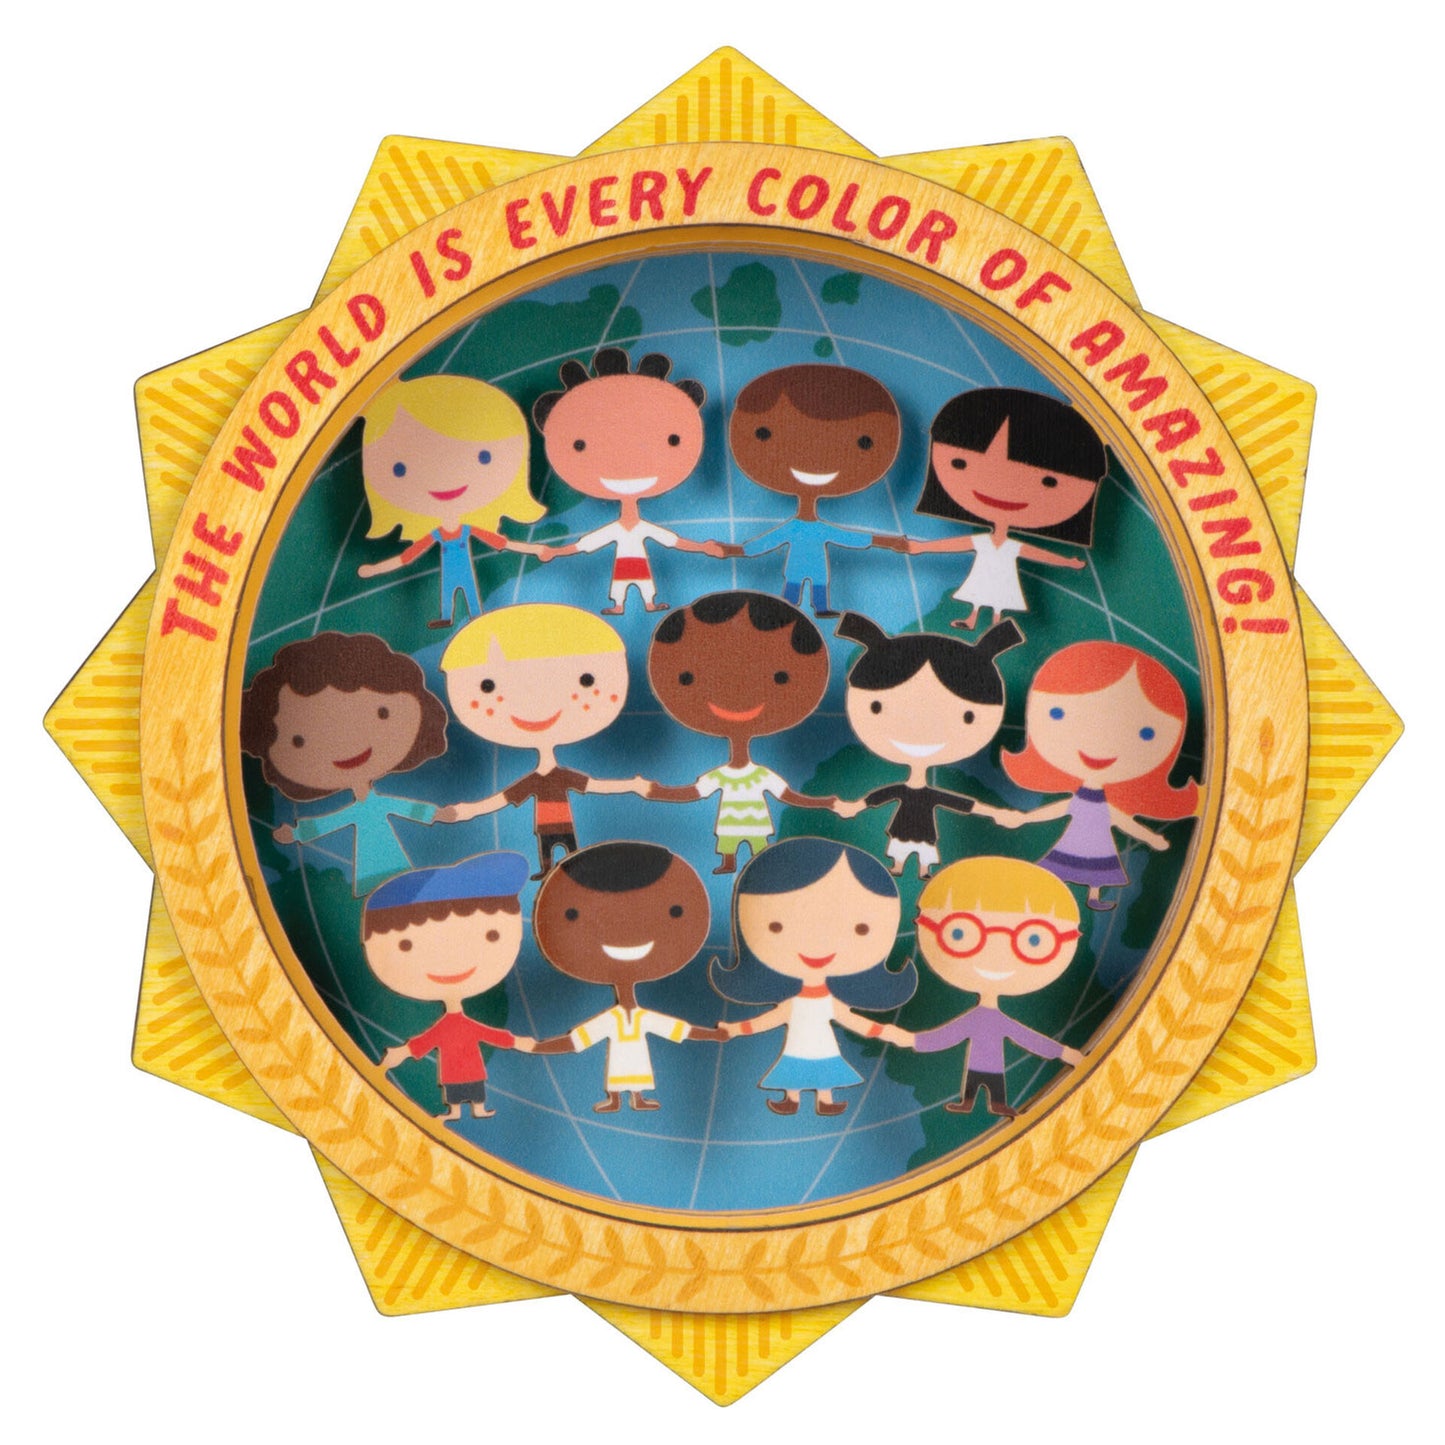 Globe with gold frame UNICEF Christmas ornament depicting 13 children holding hands and smiling with red text around the top reading "The World is Every Color of Amazing!"